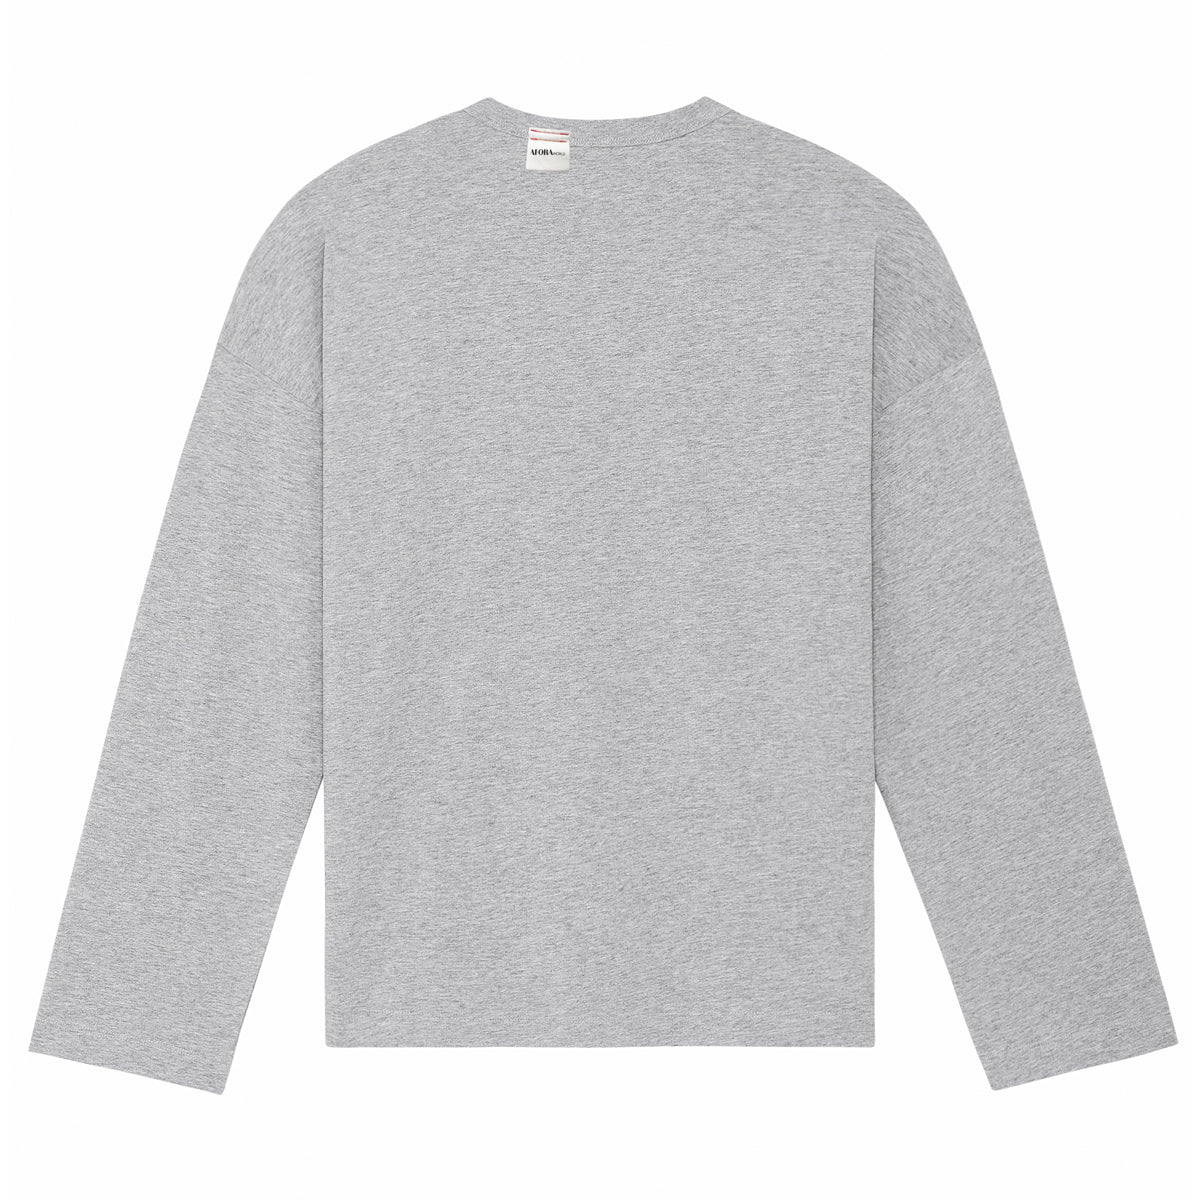 "no Plastic" Long Sleeve in gray